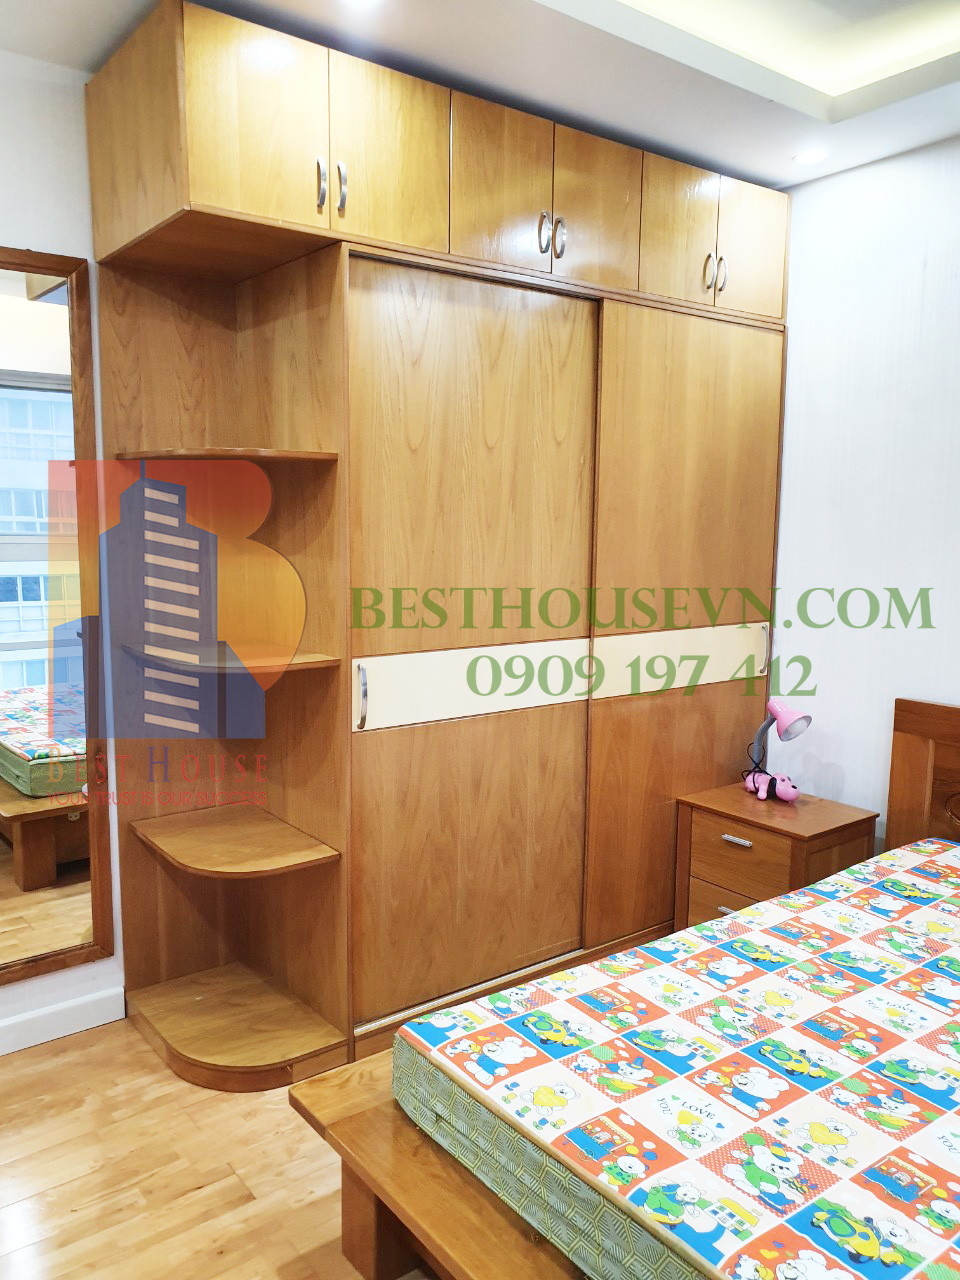 Rent Happy Valley cheap price and good interior